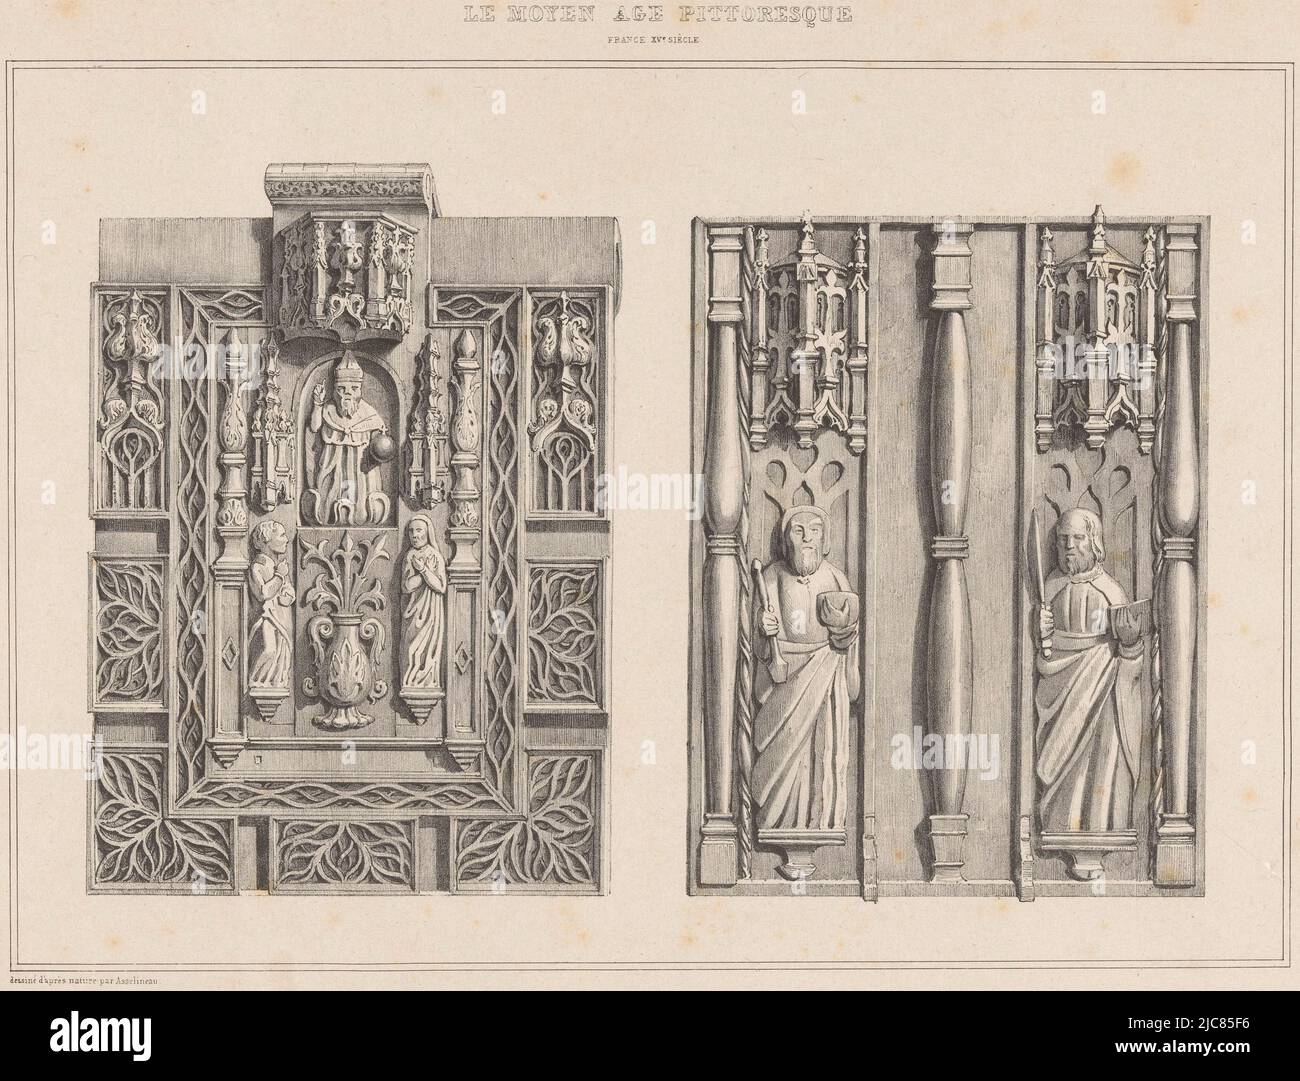 Image of two fifteenth century locks depicting biblical figures in relief from the collection of the French collector Charles Sauvageot (1781-1860), Locks with biblical figures in relief Serrures de la collection de mr. Sauvageot Le Moyen Age pittoresque , print maker: Léon Auguste Asselineau, (mentioned on object), intermediary draughtsman: Léon Auguste Asselineau, (mentioned on object), printer: Benard Lemercier & Cie, (mentioned on object), print maker: Rouen, intermediary draughtsman: Rouen, printer: Paris, publisher: Paris, 1837 - 1839, paper, h 300 mm × w 446 mm Stock Photo